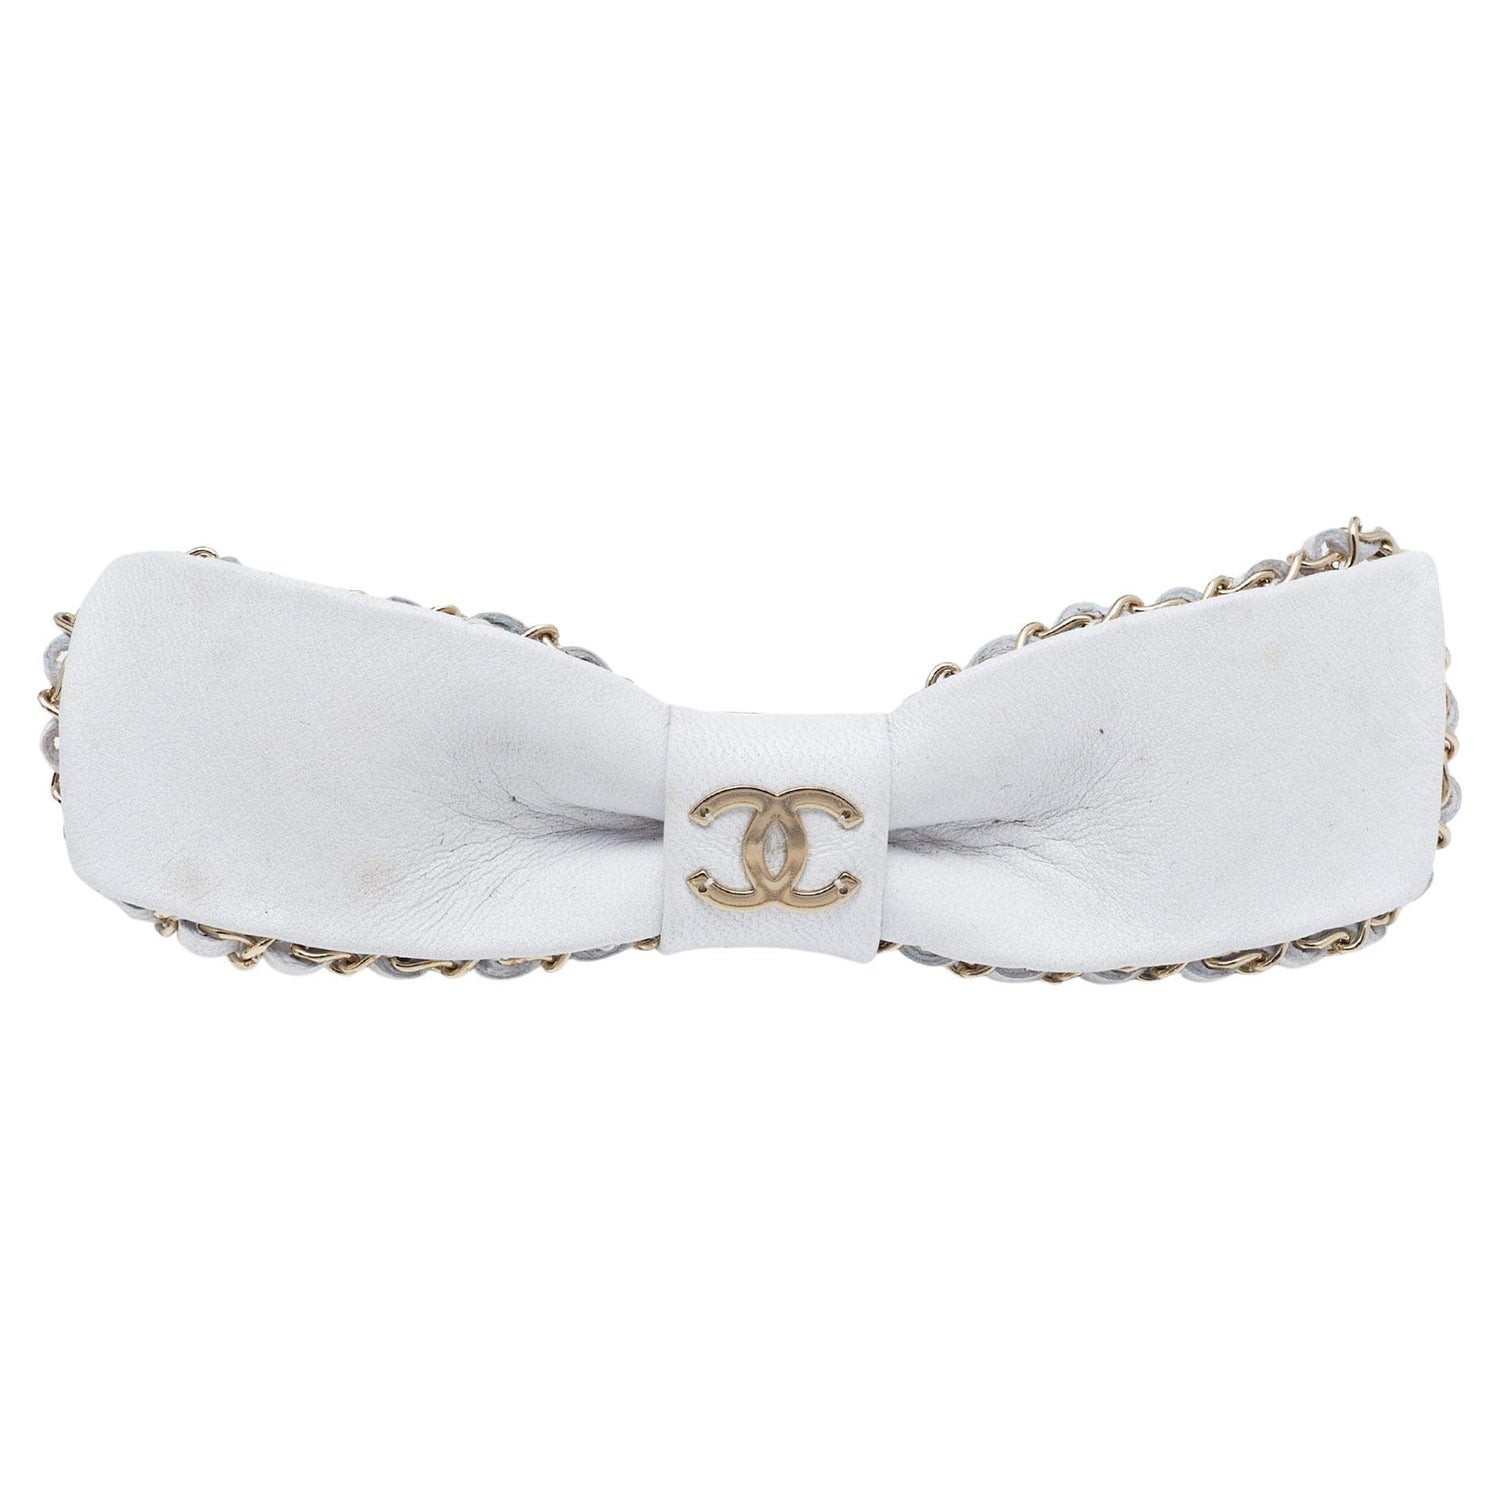 Vintage 90s Hand Wrapped Black Silk Chanel Bow Headband By Chanel | Shop  THRILLING